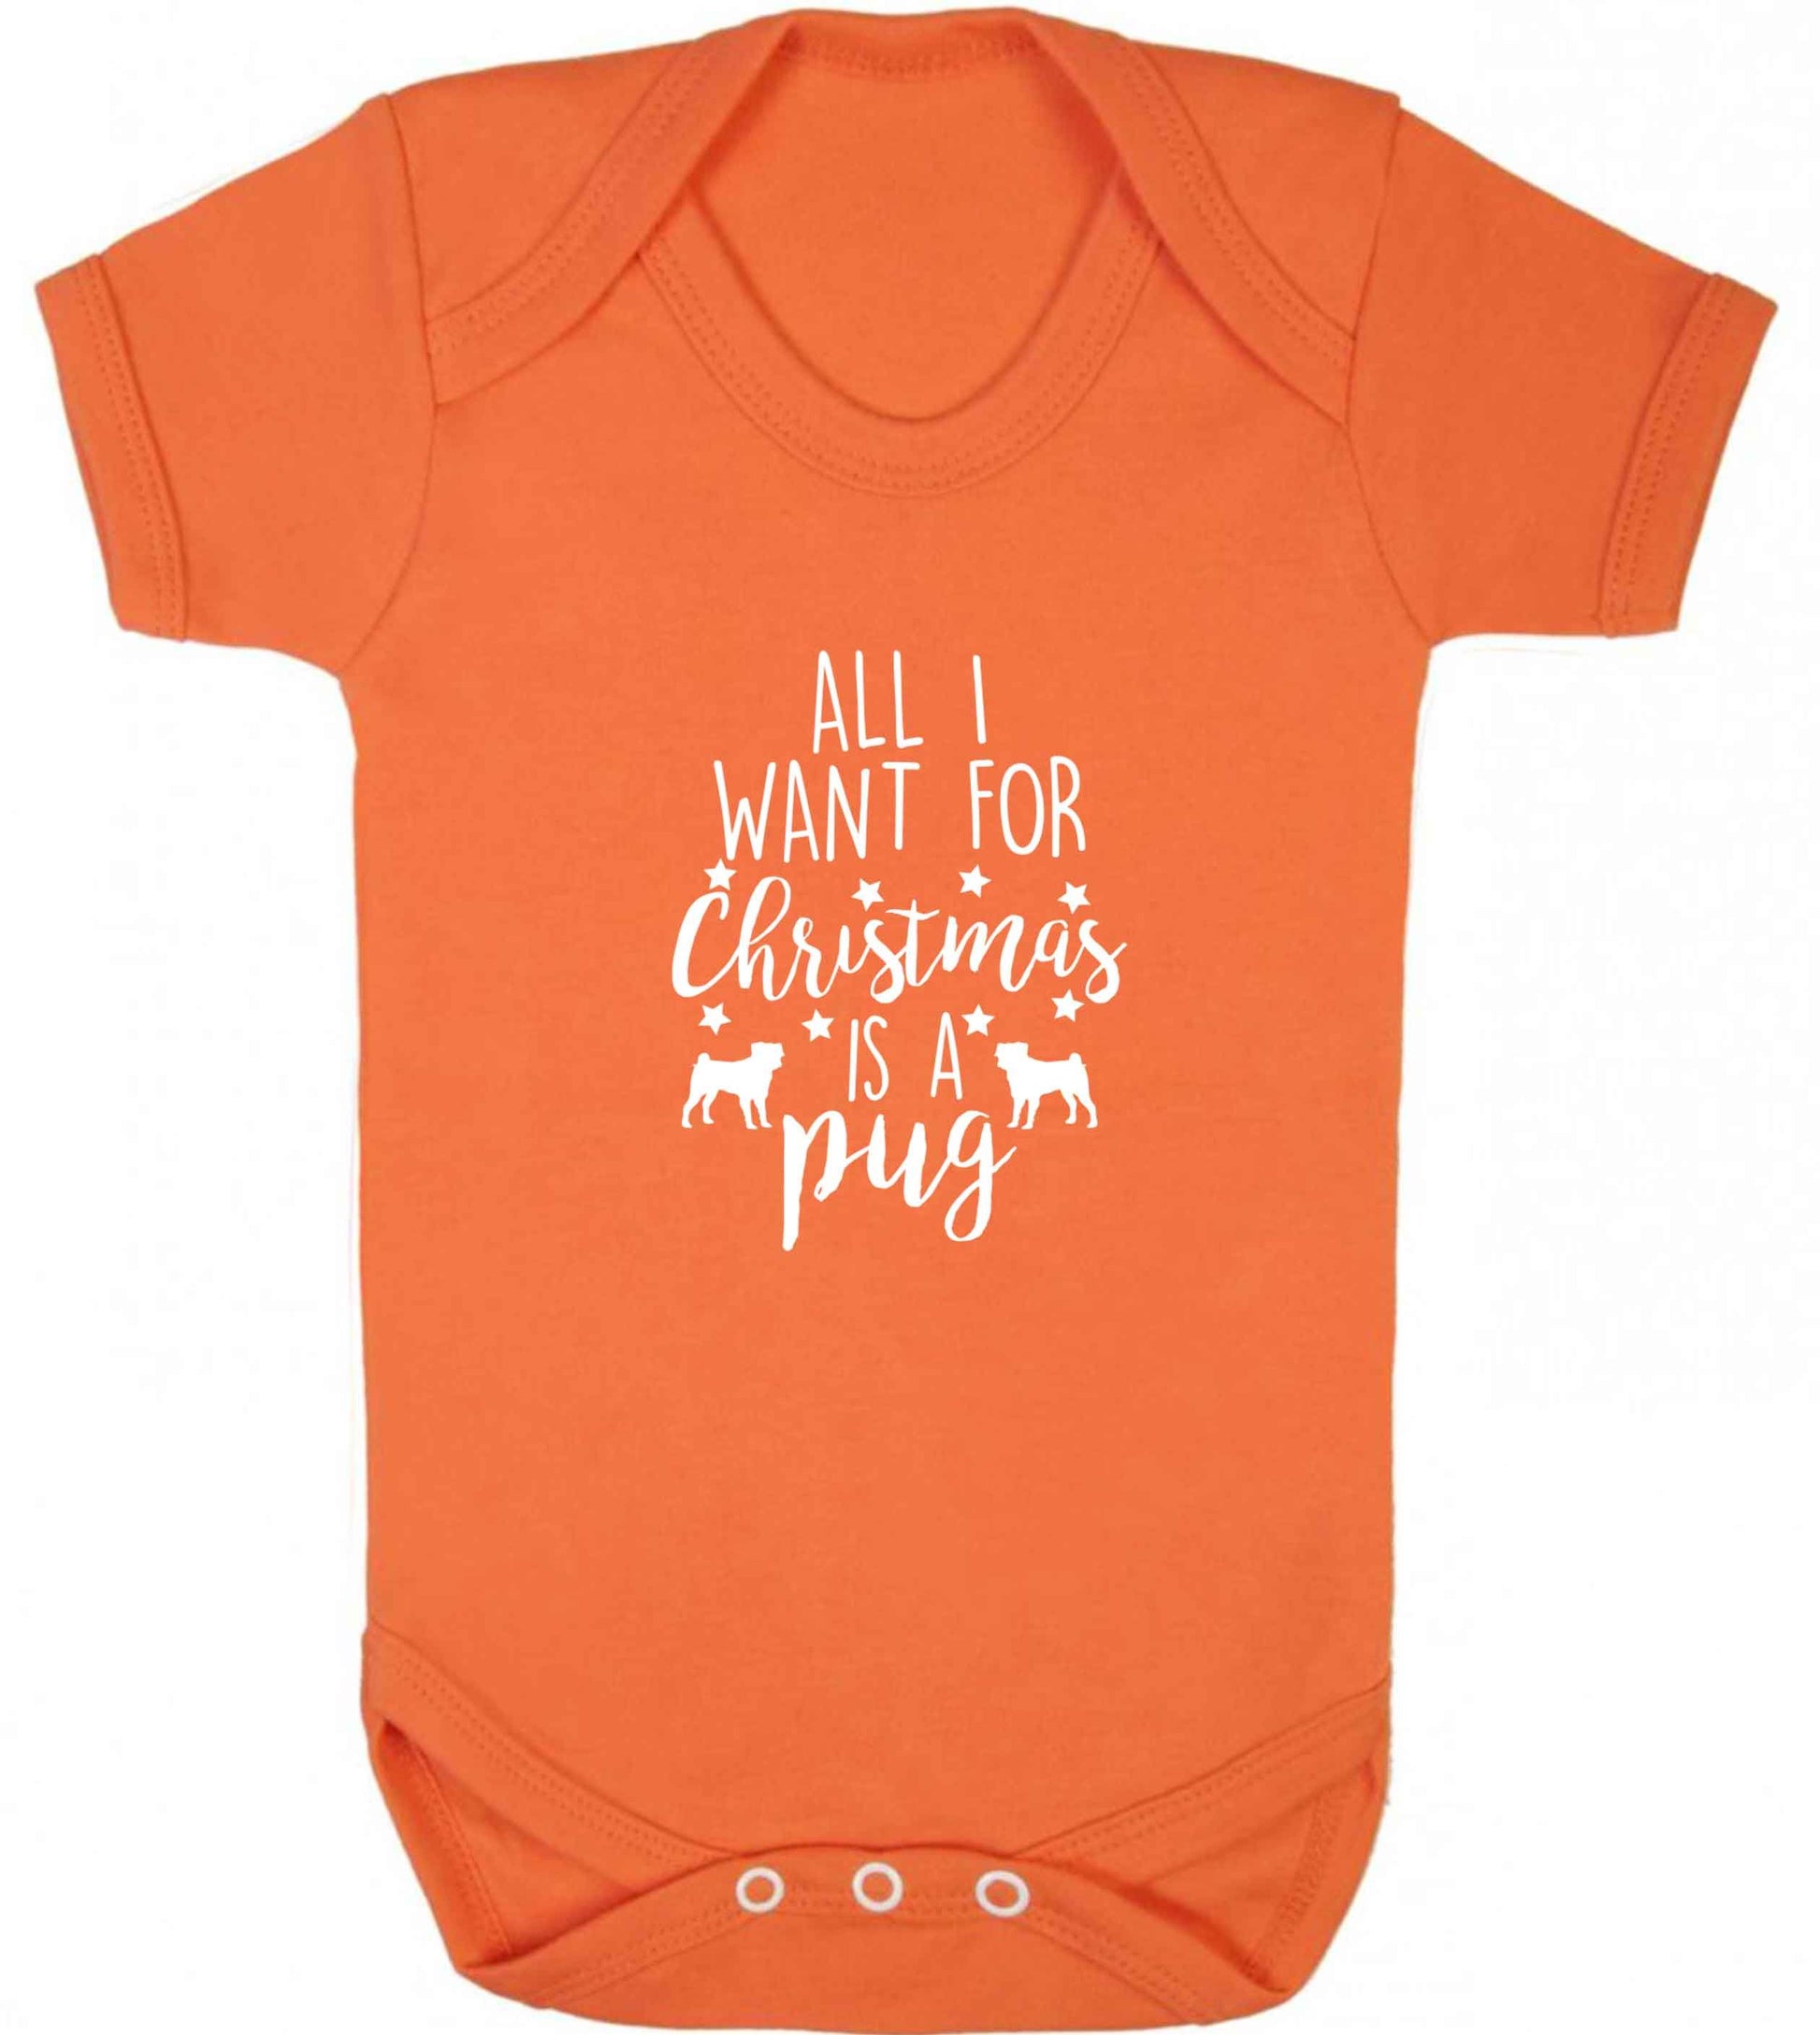 All I want for Christmas is a pug baby vest orange 18-24 months